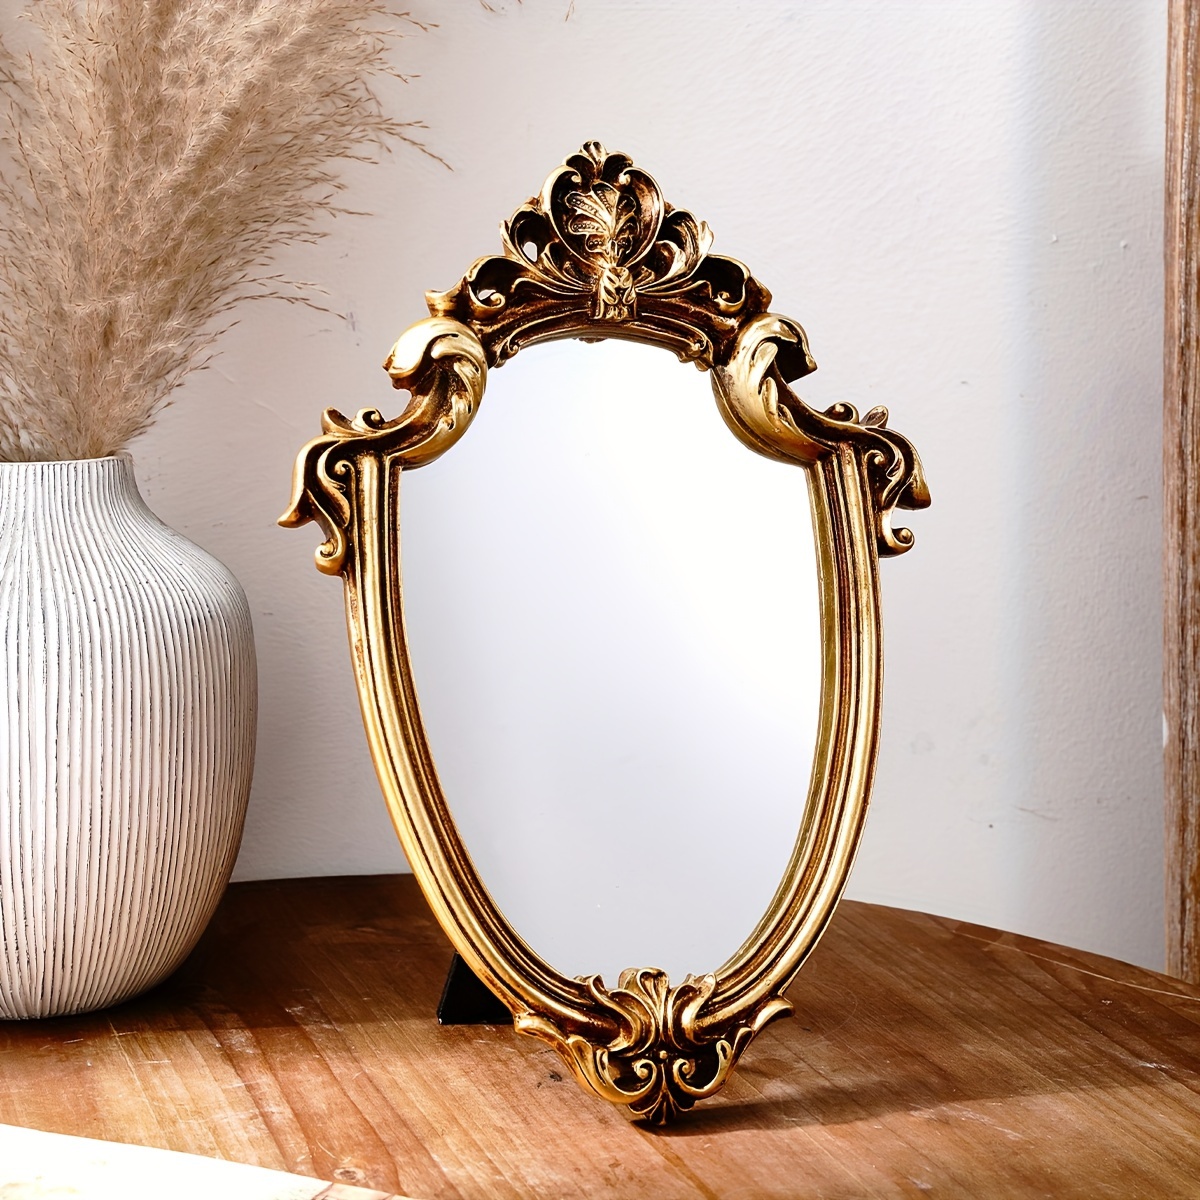 

1pc Vintage European Style Gold Floral Pattern Uniquely Shaped Mirror, Hanging Or Tabletop Royal Decorative Mirror For Home Wall Decoration Or Vanity